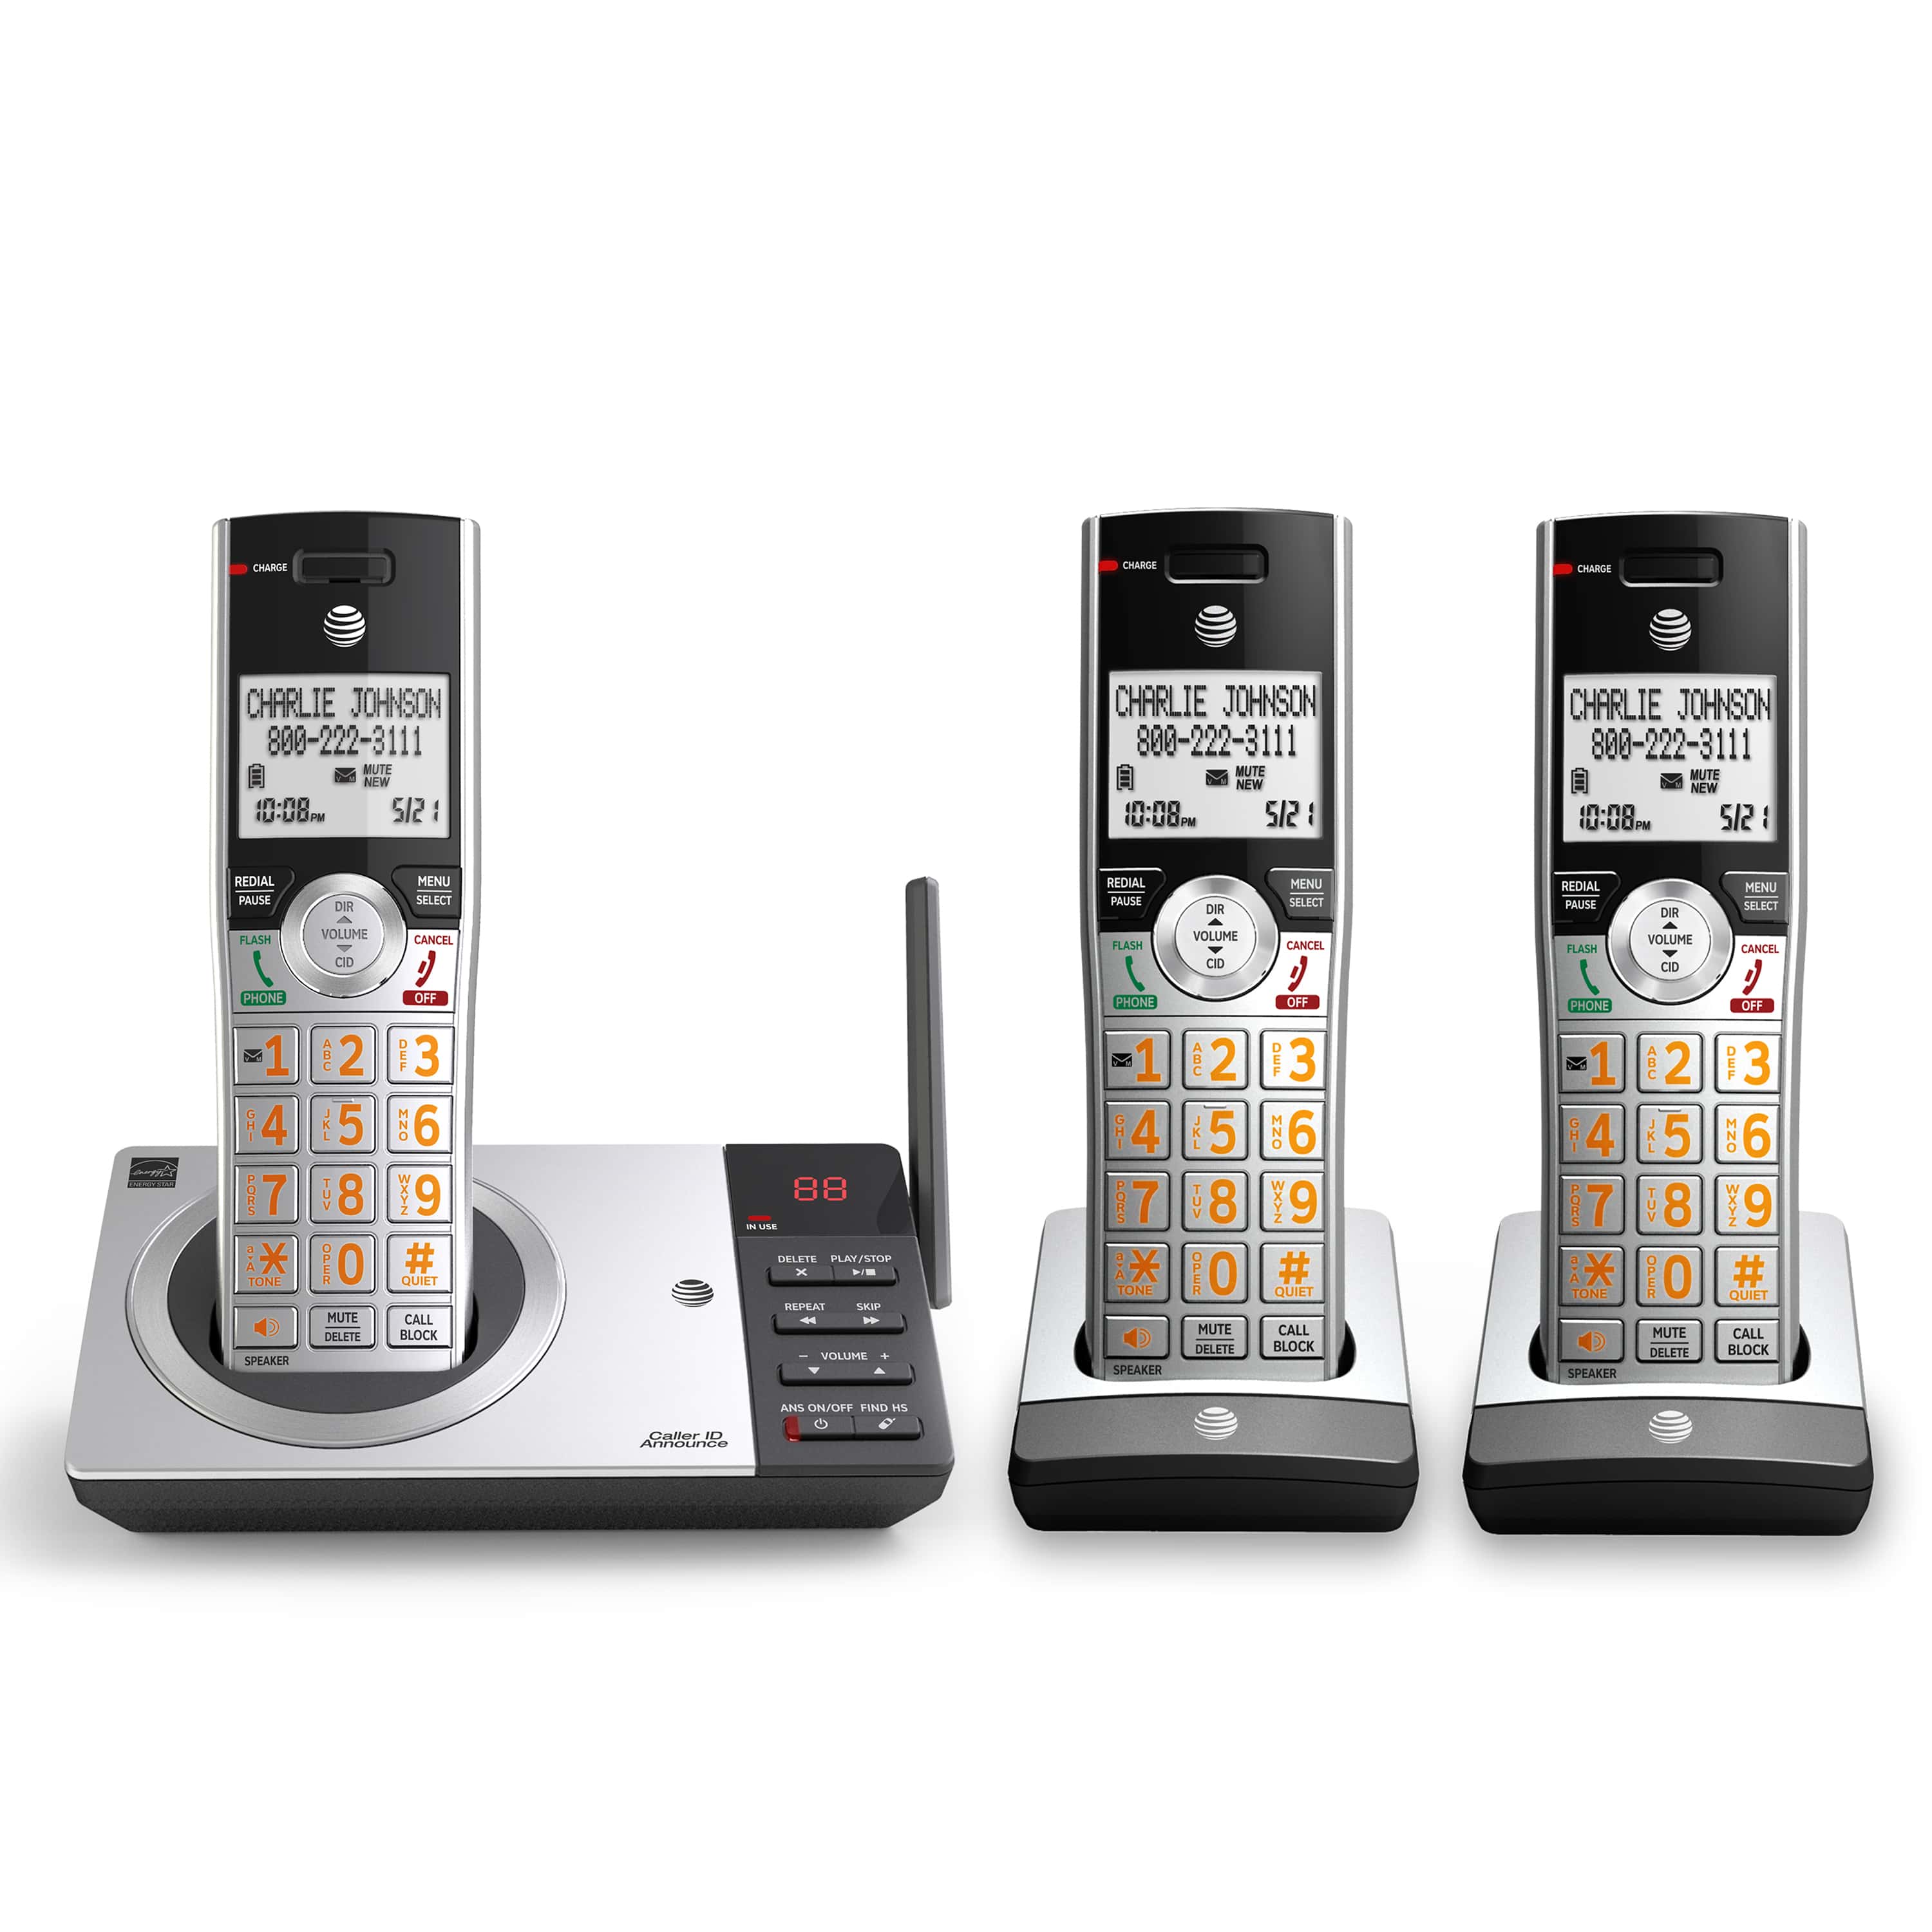 AT&T CL80107 Accessory Cordless Handset Silver/Black Requires AT&T CL82207 or Other Models to Operate 